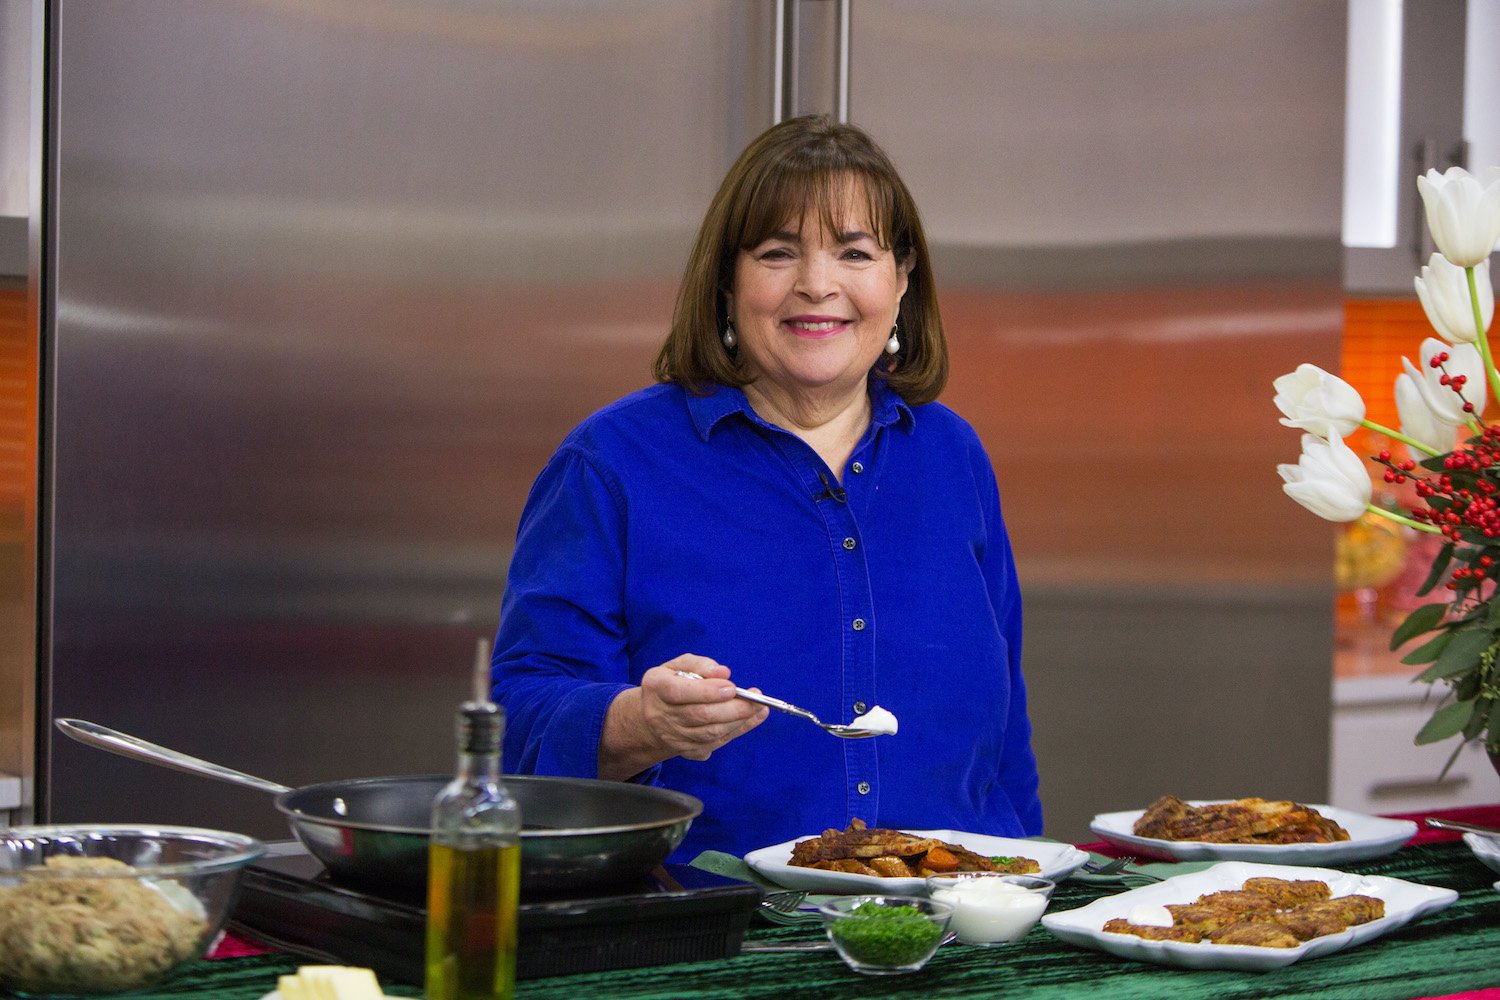 Ina Garten on the 'Today' show 